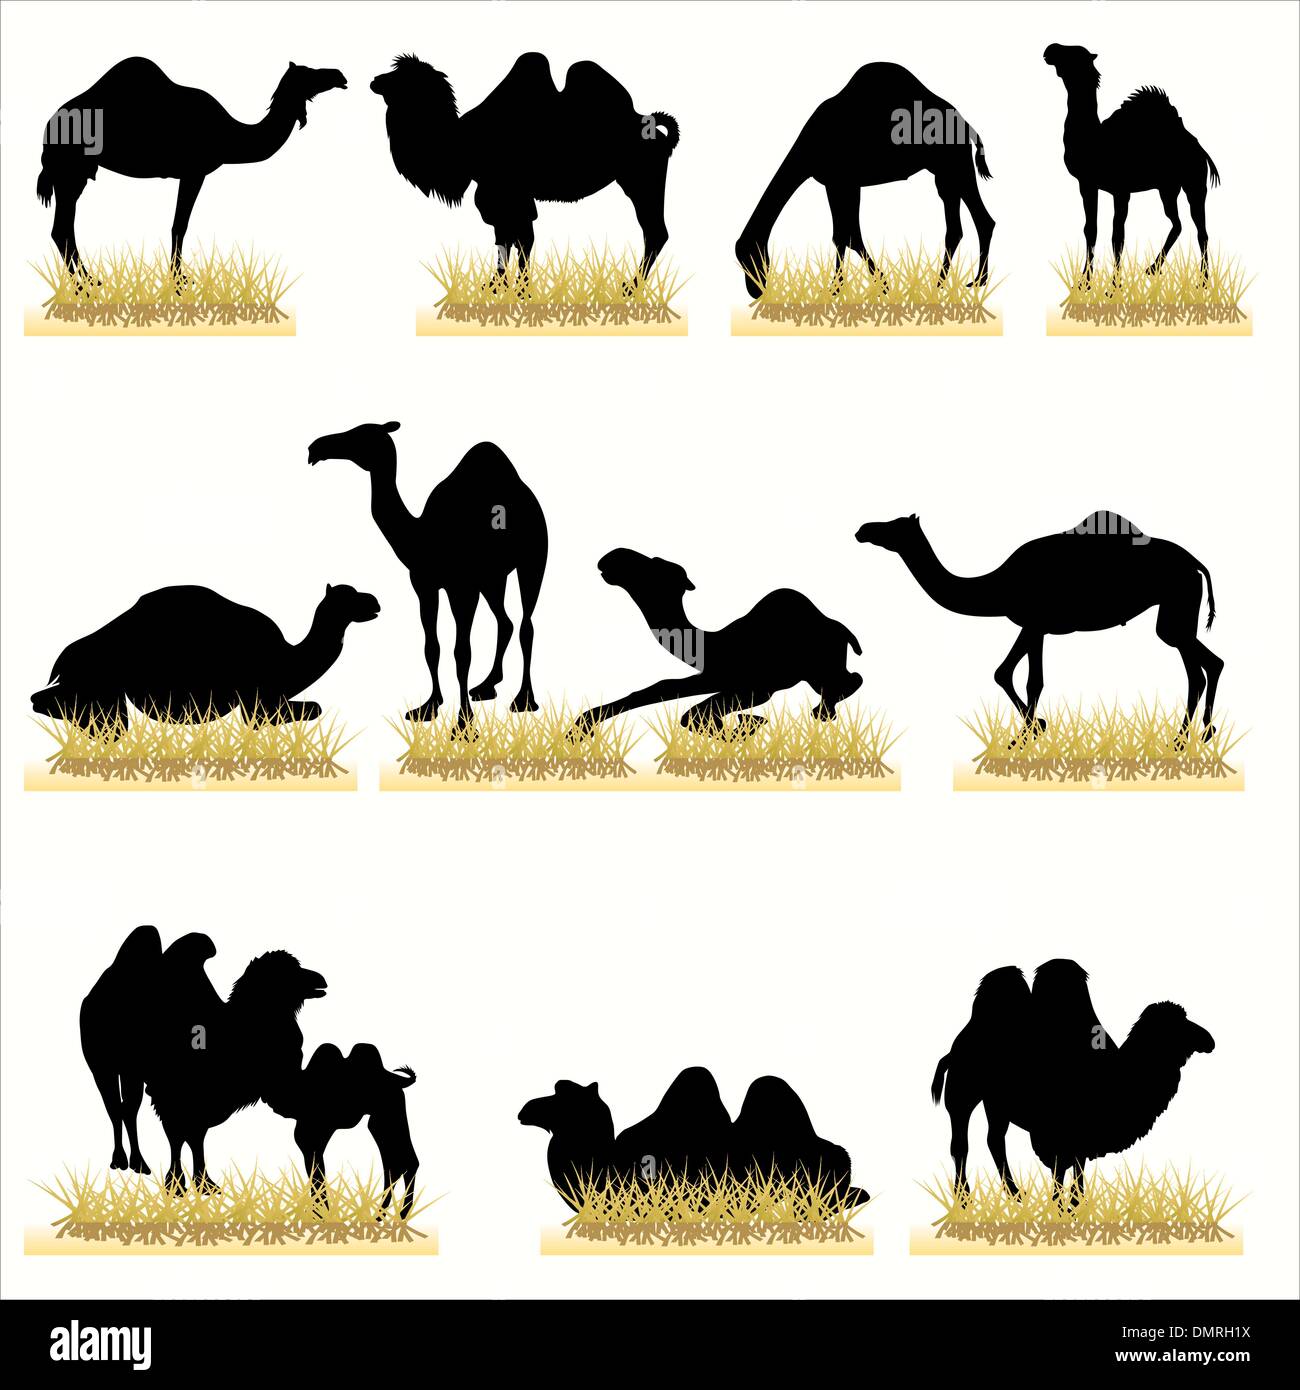 Camels silhouettes set Stock Vector